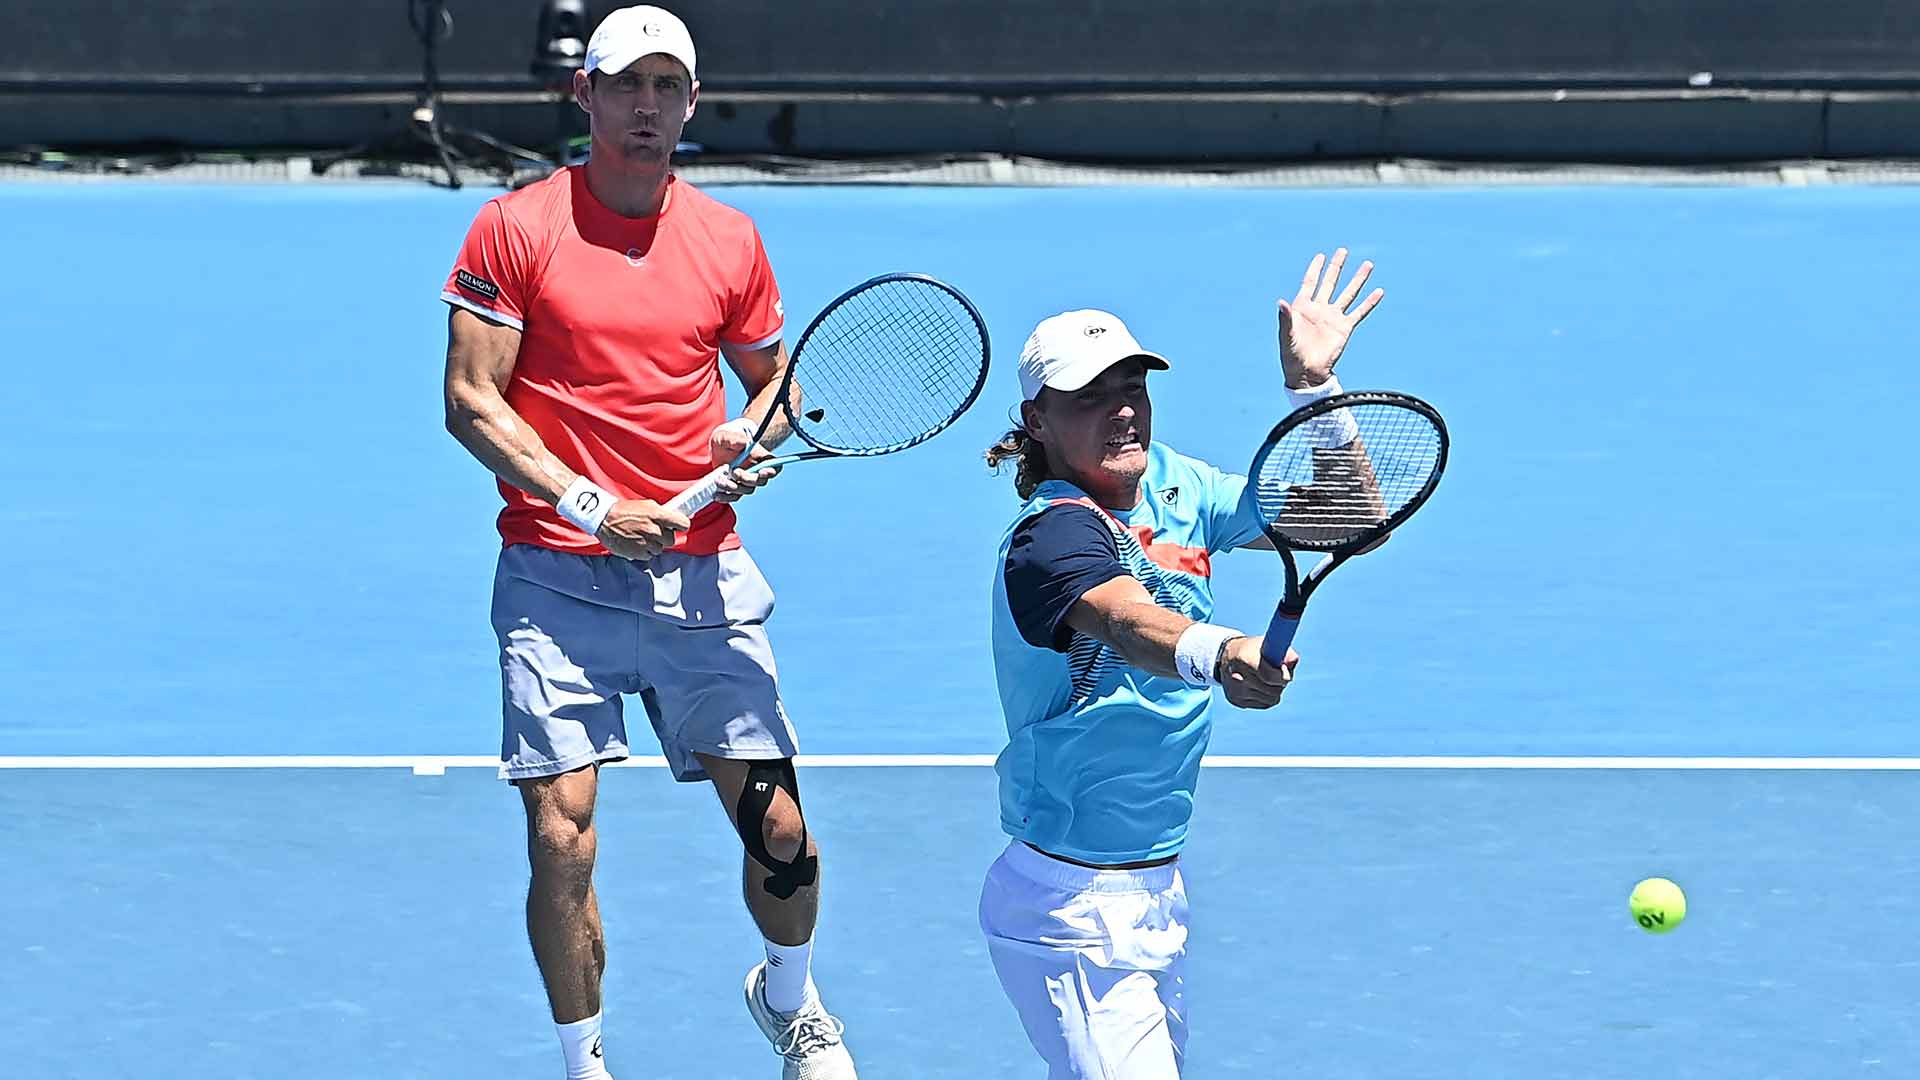 Matthew Ebden and Max Purcell upset fourth seeds Cabal/Farah in the Australian Open second round.